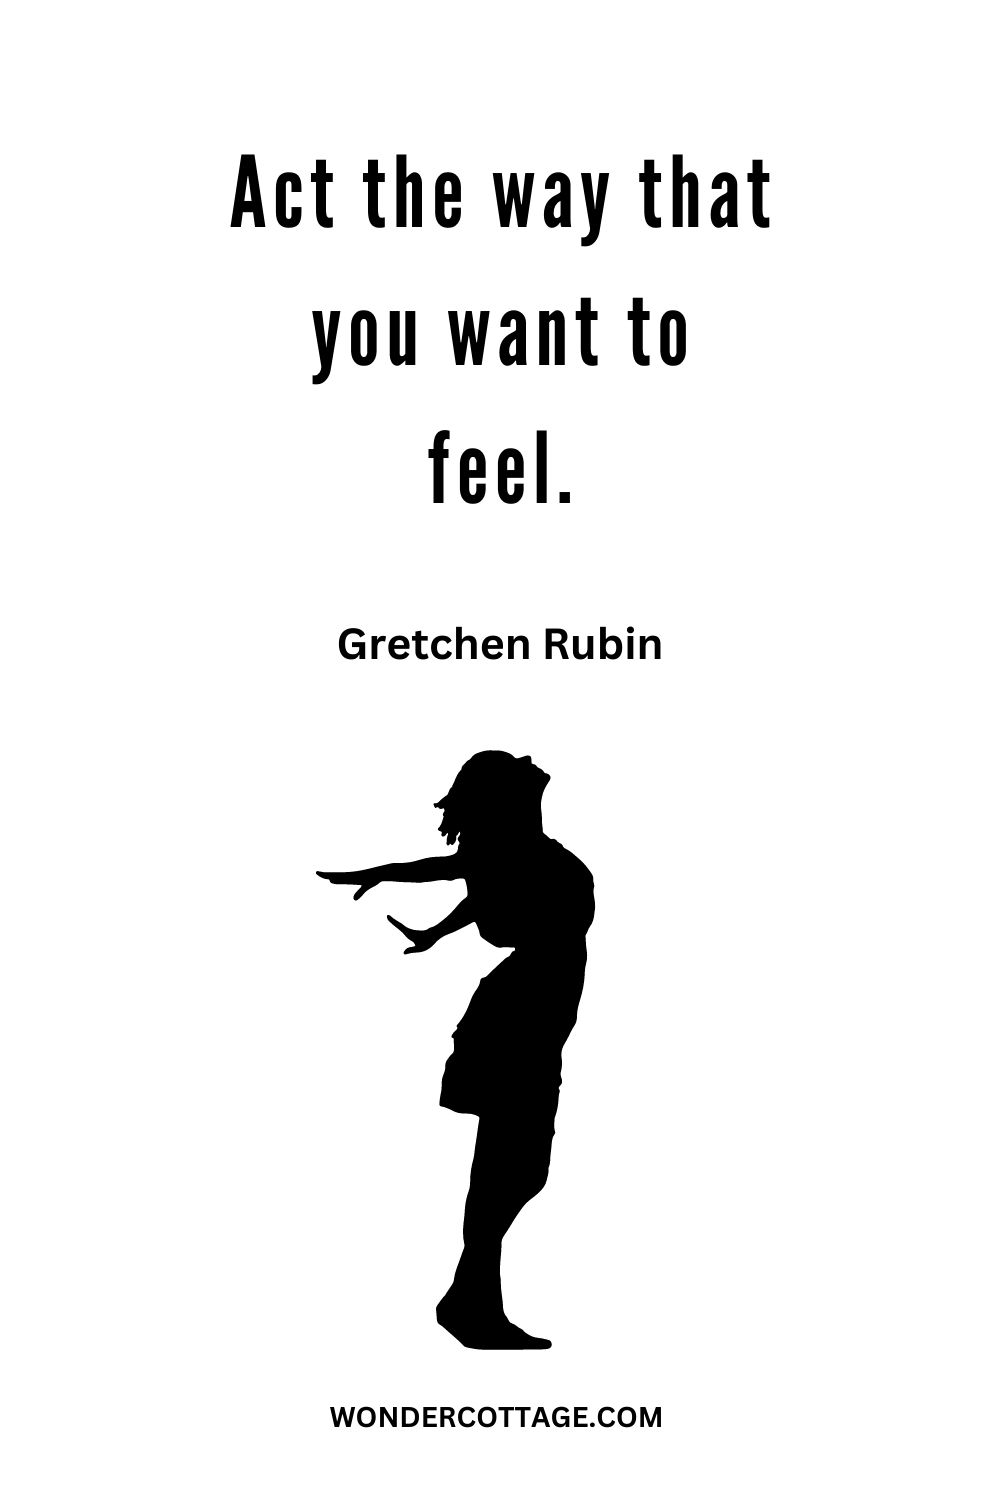 Act the way that you want to feel. Gretchen Rubin